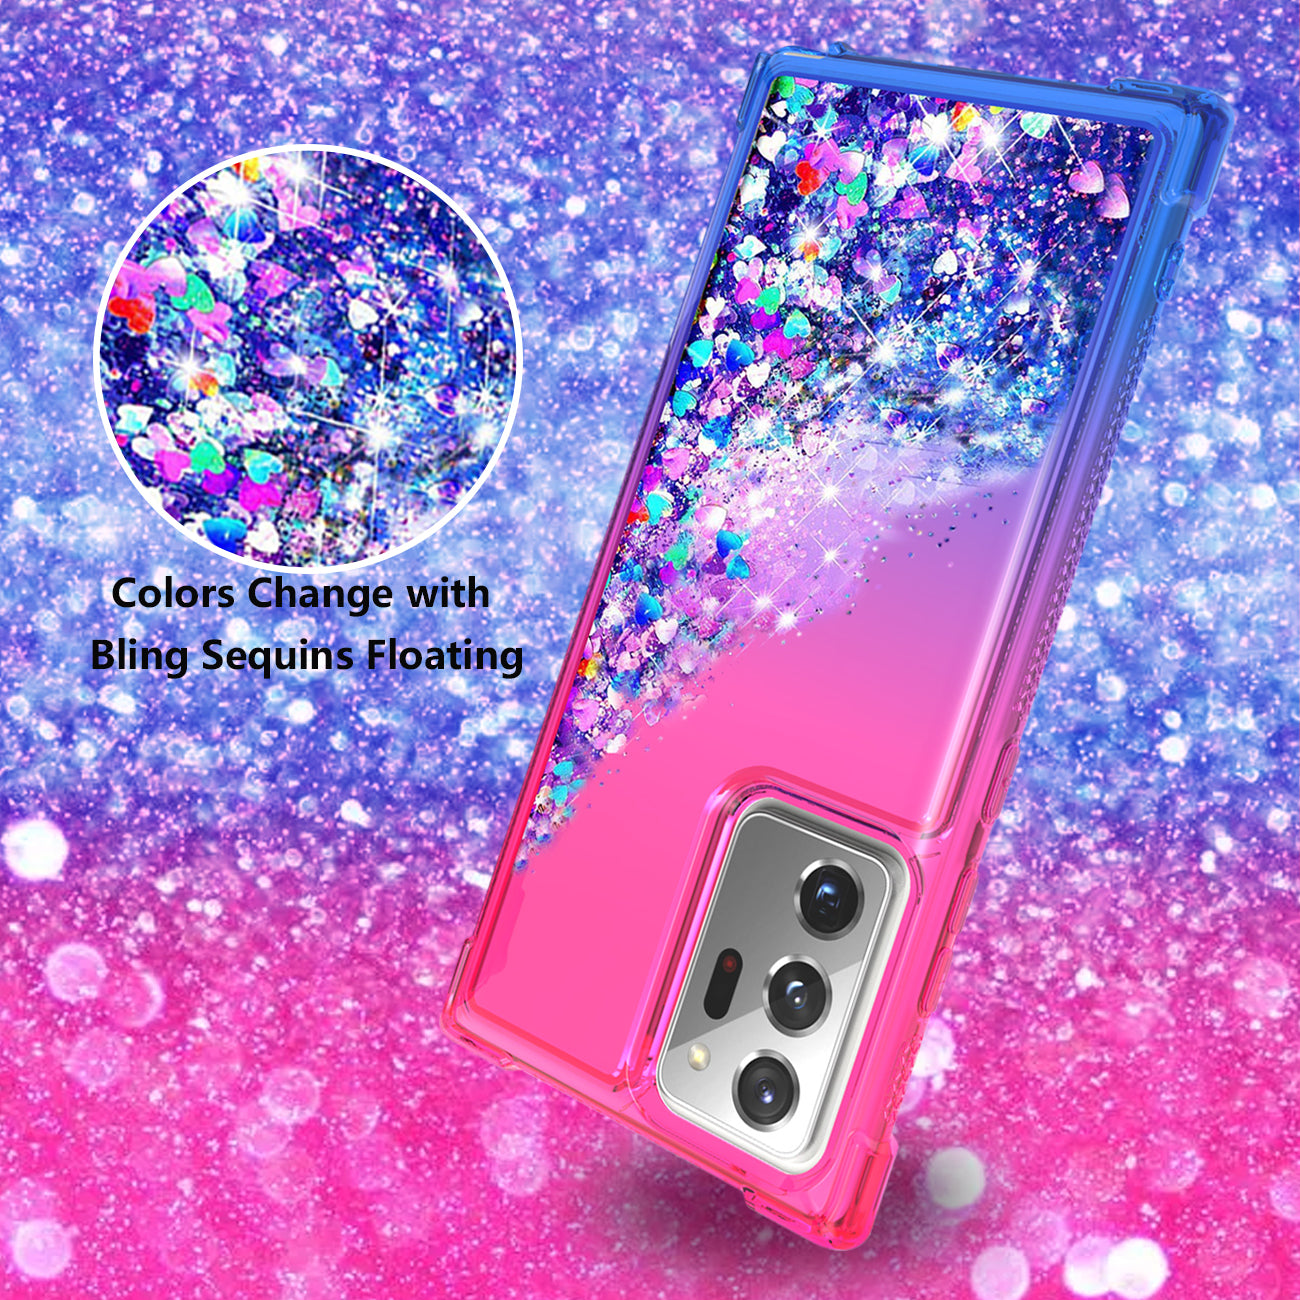 Case Bumper Shiny Flowing Glitter Liquid Samsung Galaxy Note 20 Ultra Pink Color